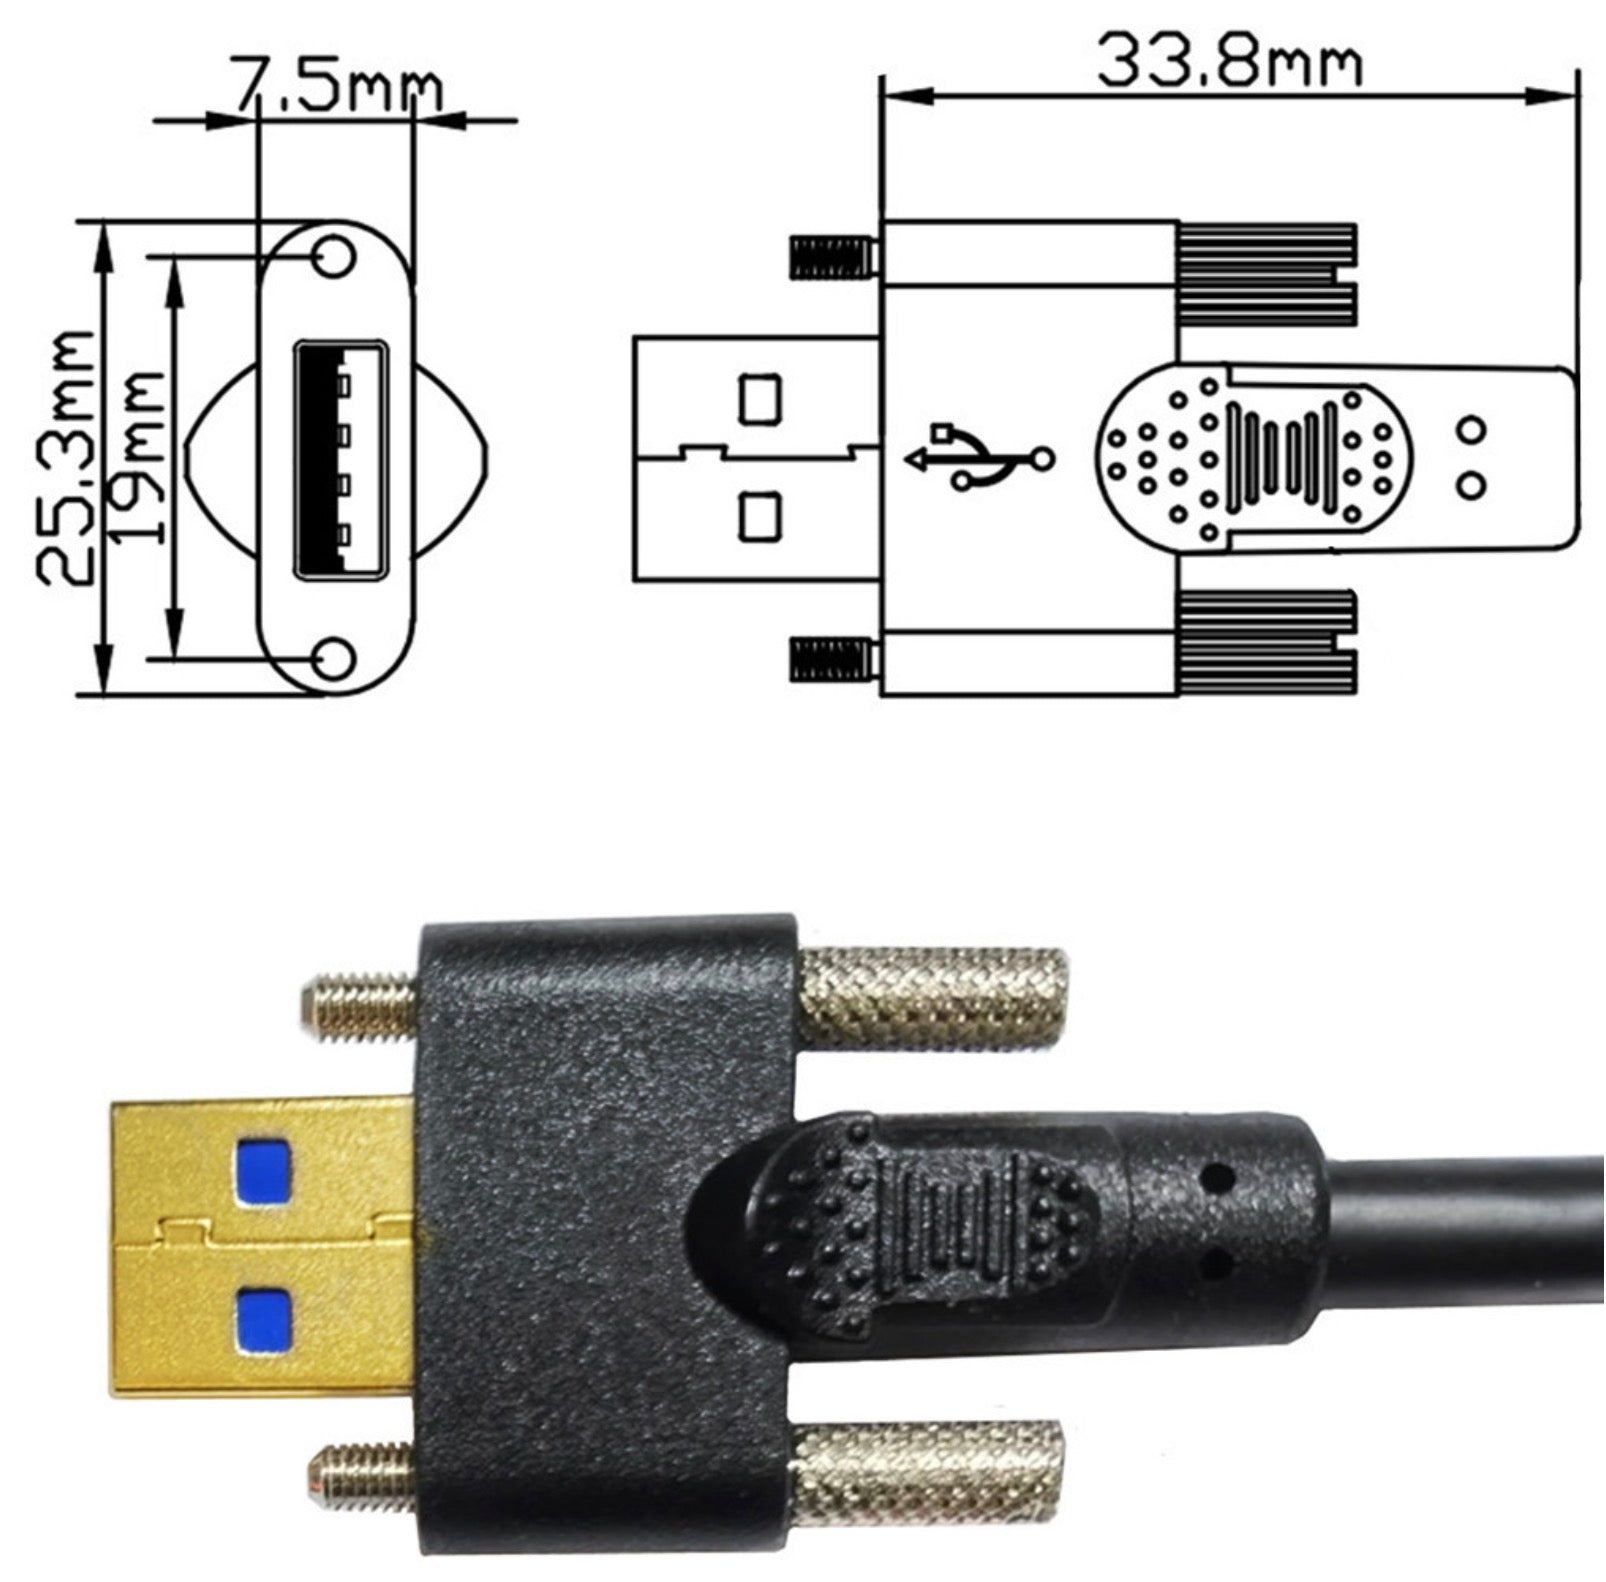 USB 3.0 A Male to B Male Cable with Dual M3 Screw Lock Mechanism